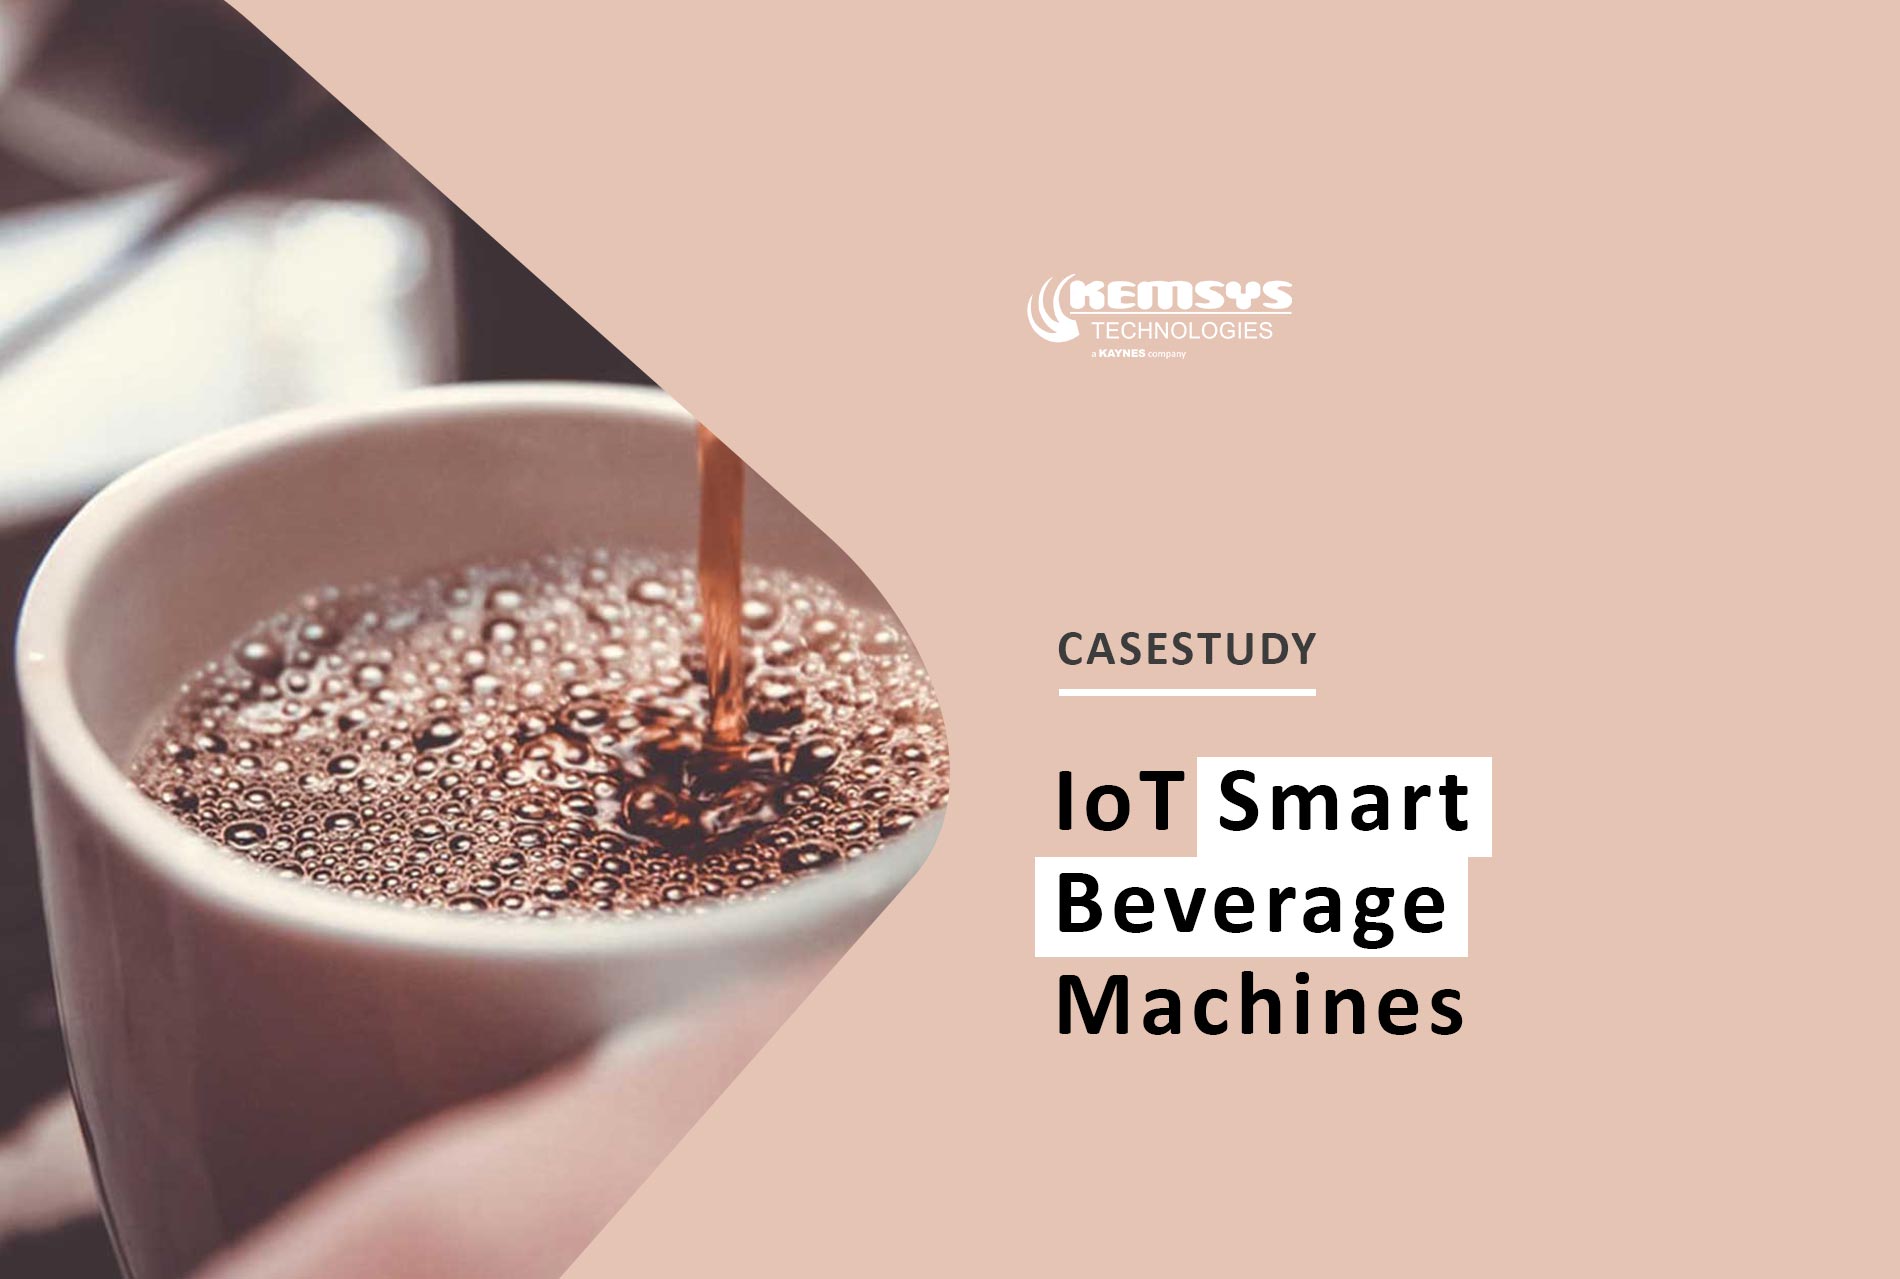 Case--IoT-Smart-Beverage-Machines--FnB-IoT-Solutions-by-Kemsys_